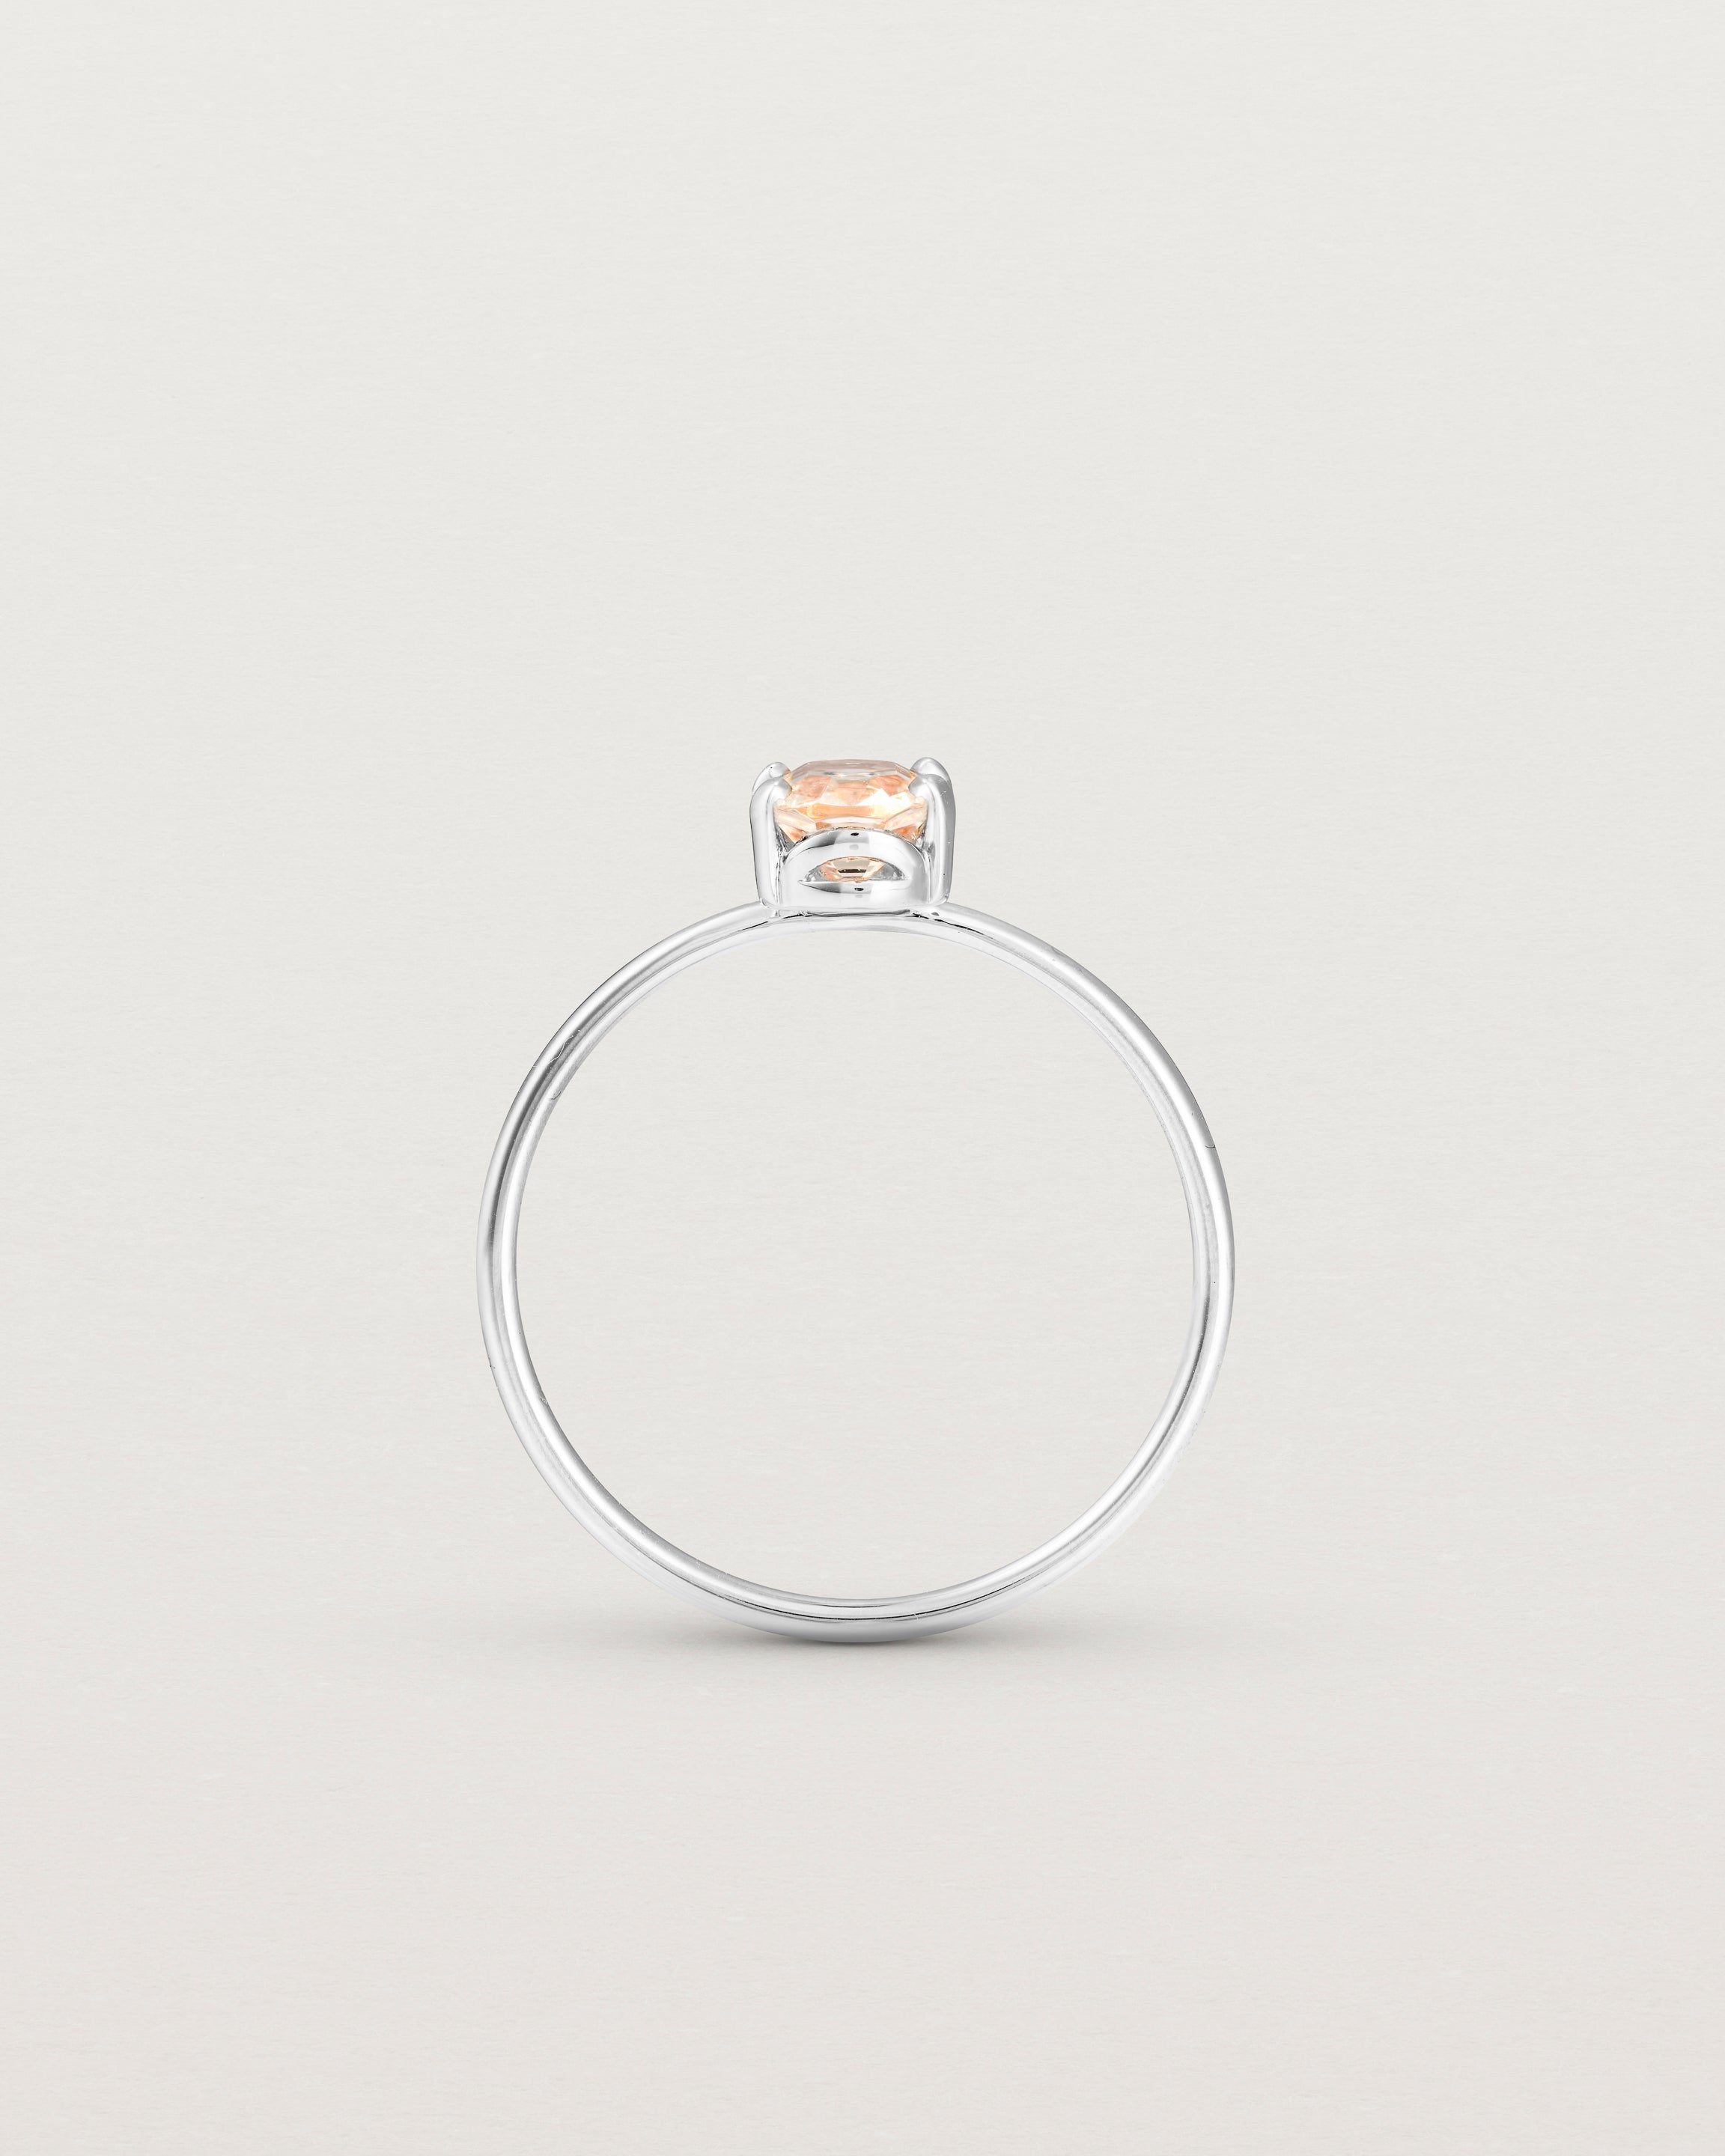 Standing view of the Tiny Fei Ring | Morganite in sterling silver.